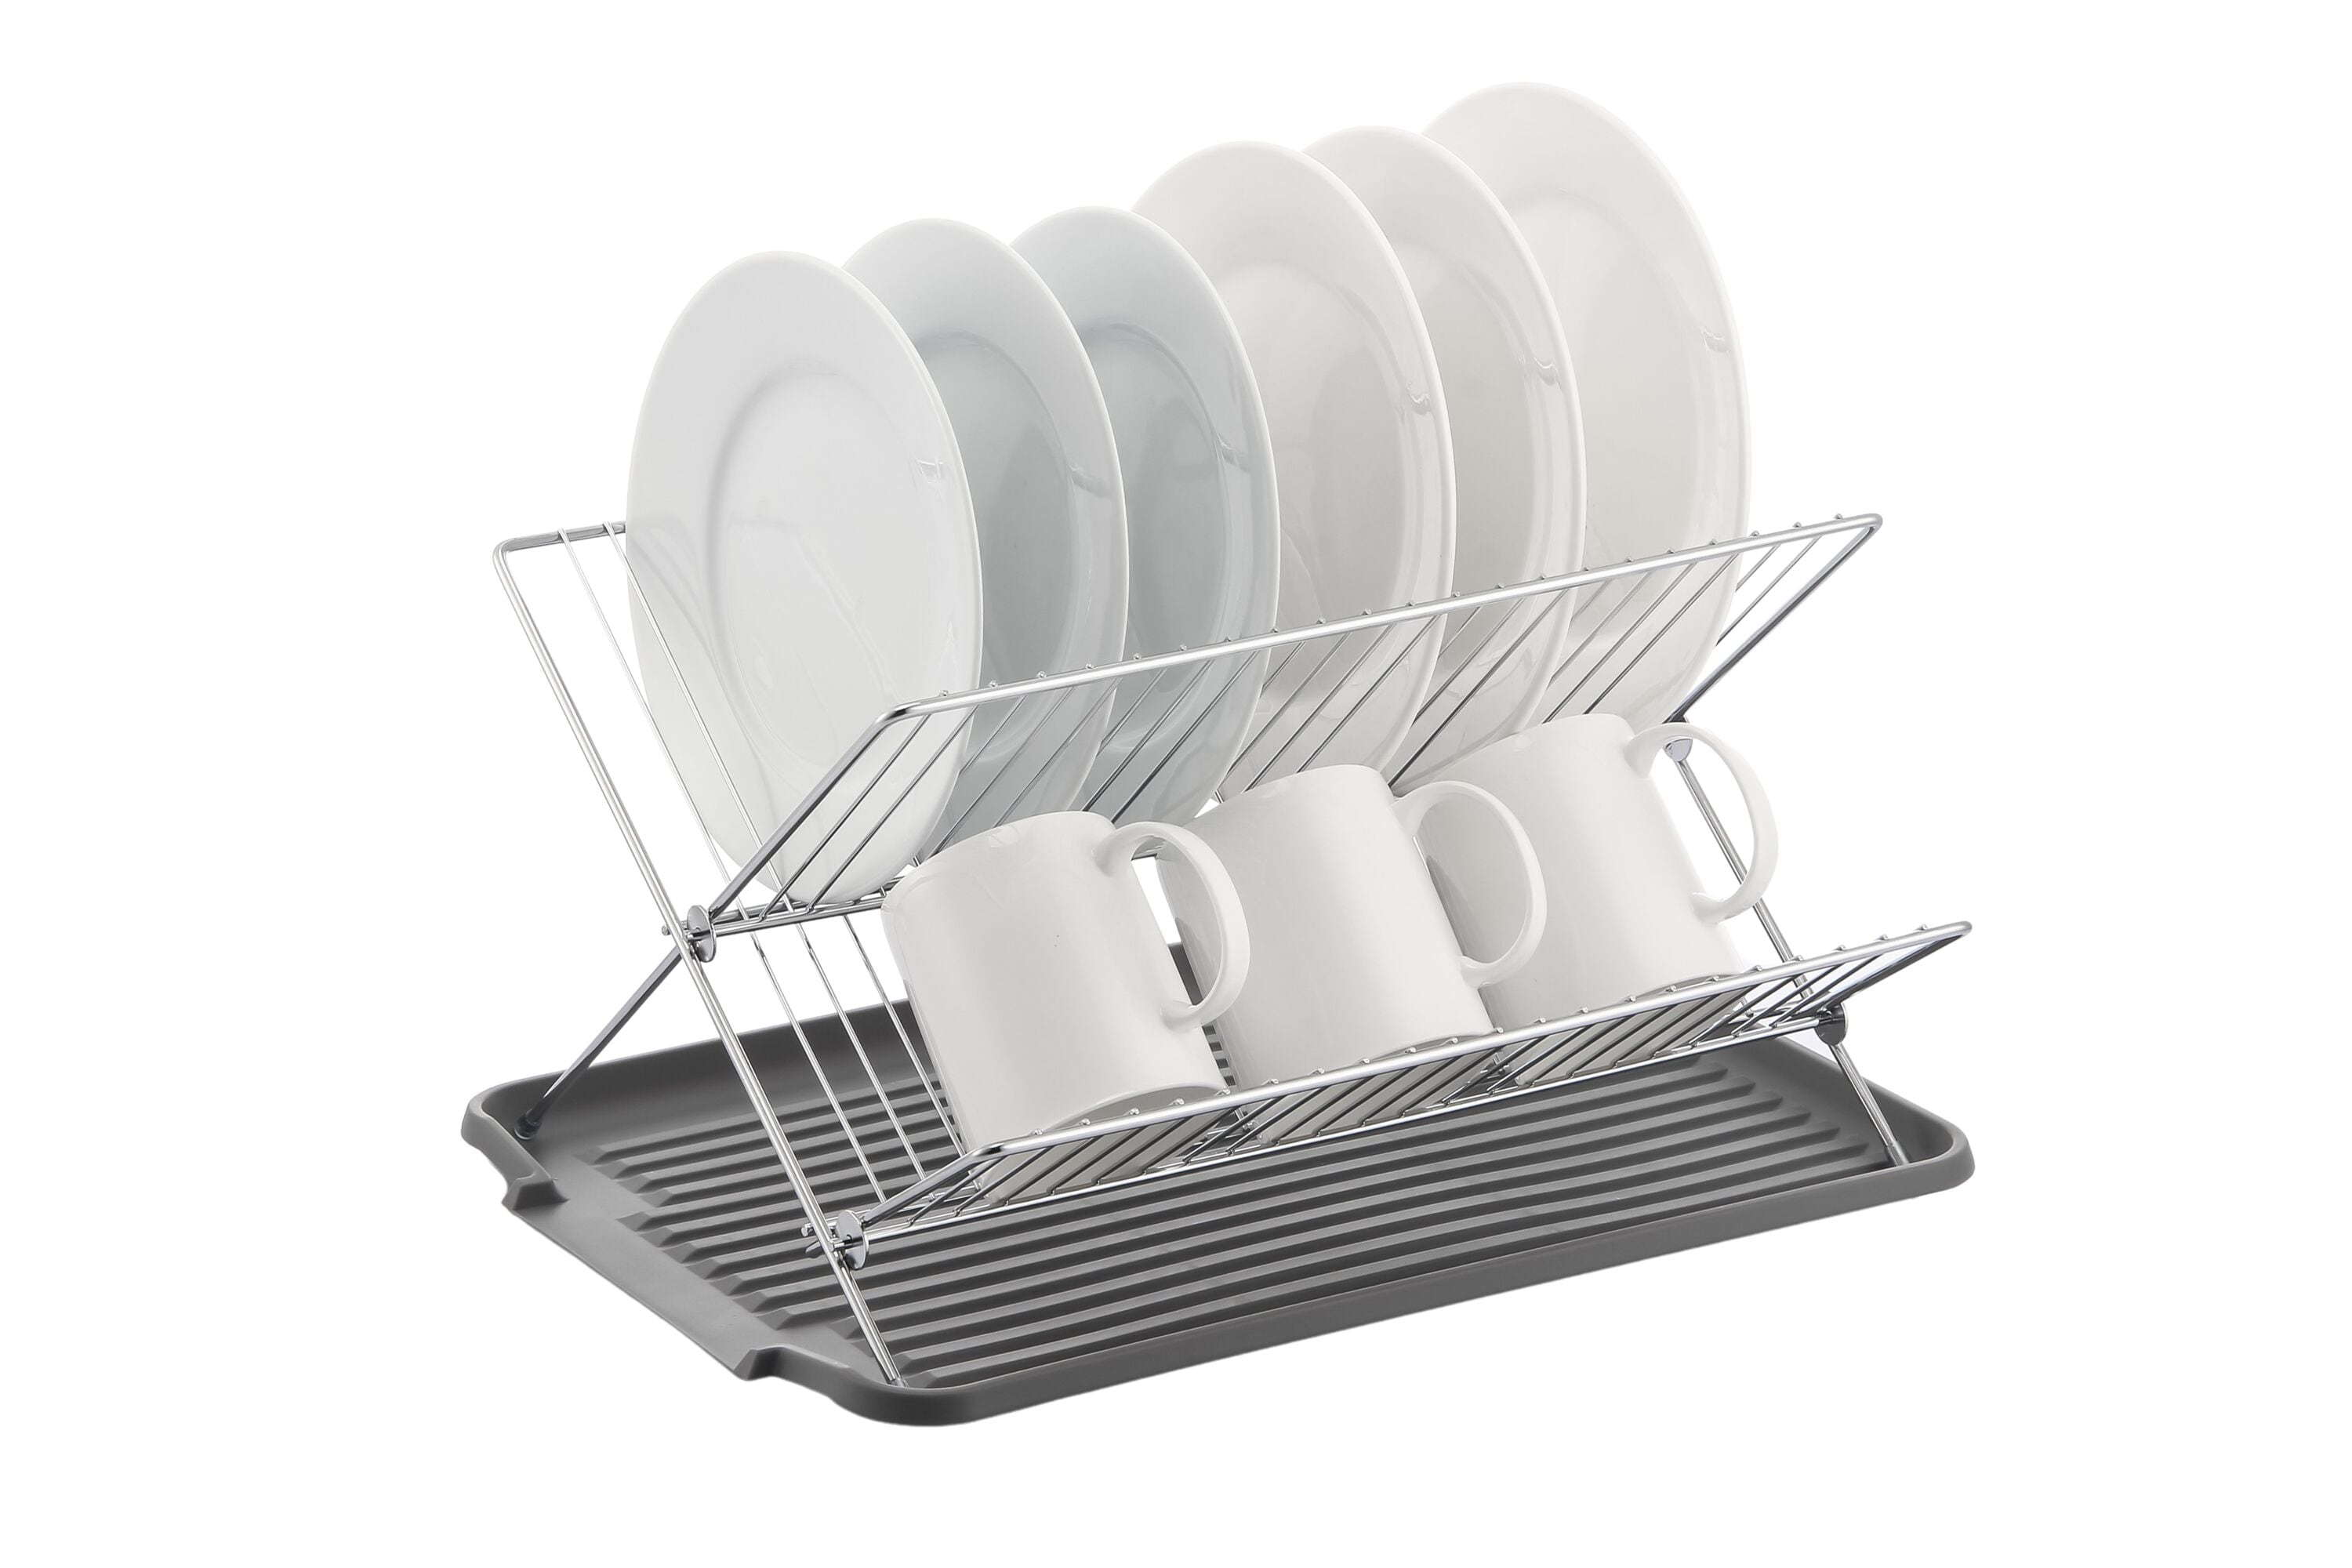 MegaChef 17 Inch Red and Silver Dish Rack with Detachable Utensil